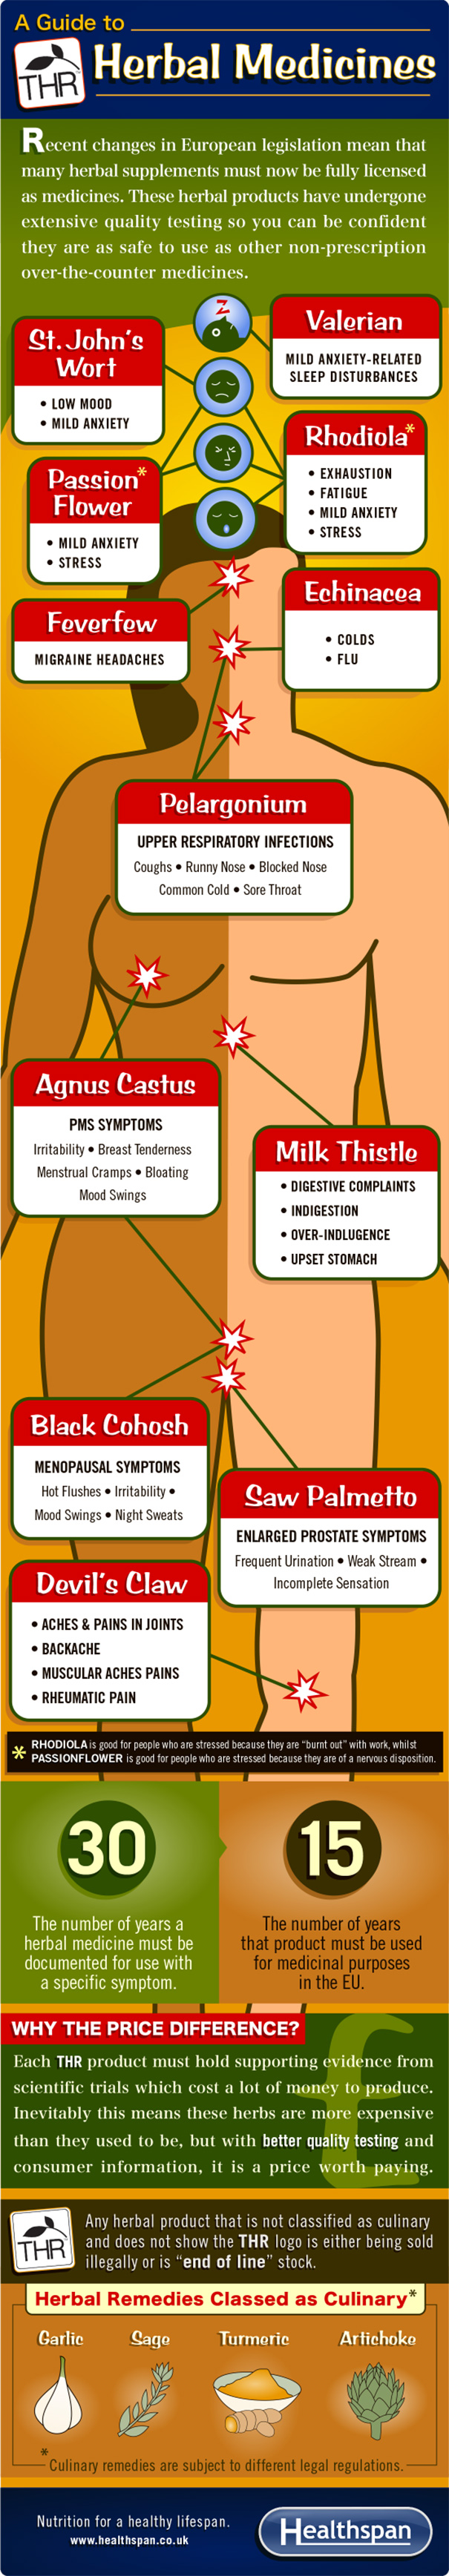 Herbal Medicines Guide Infographic